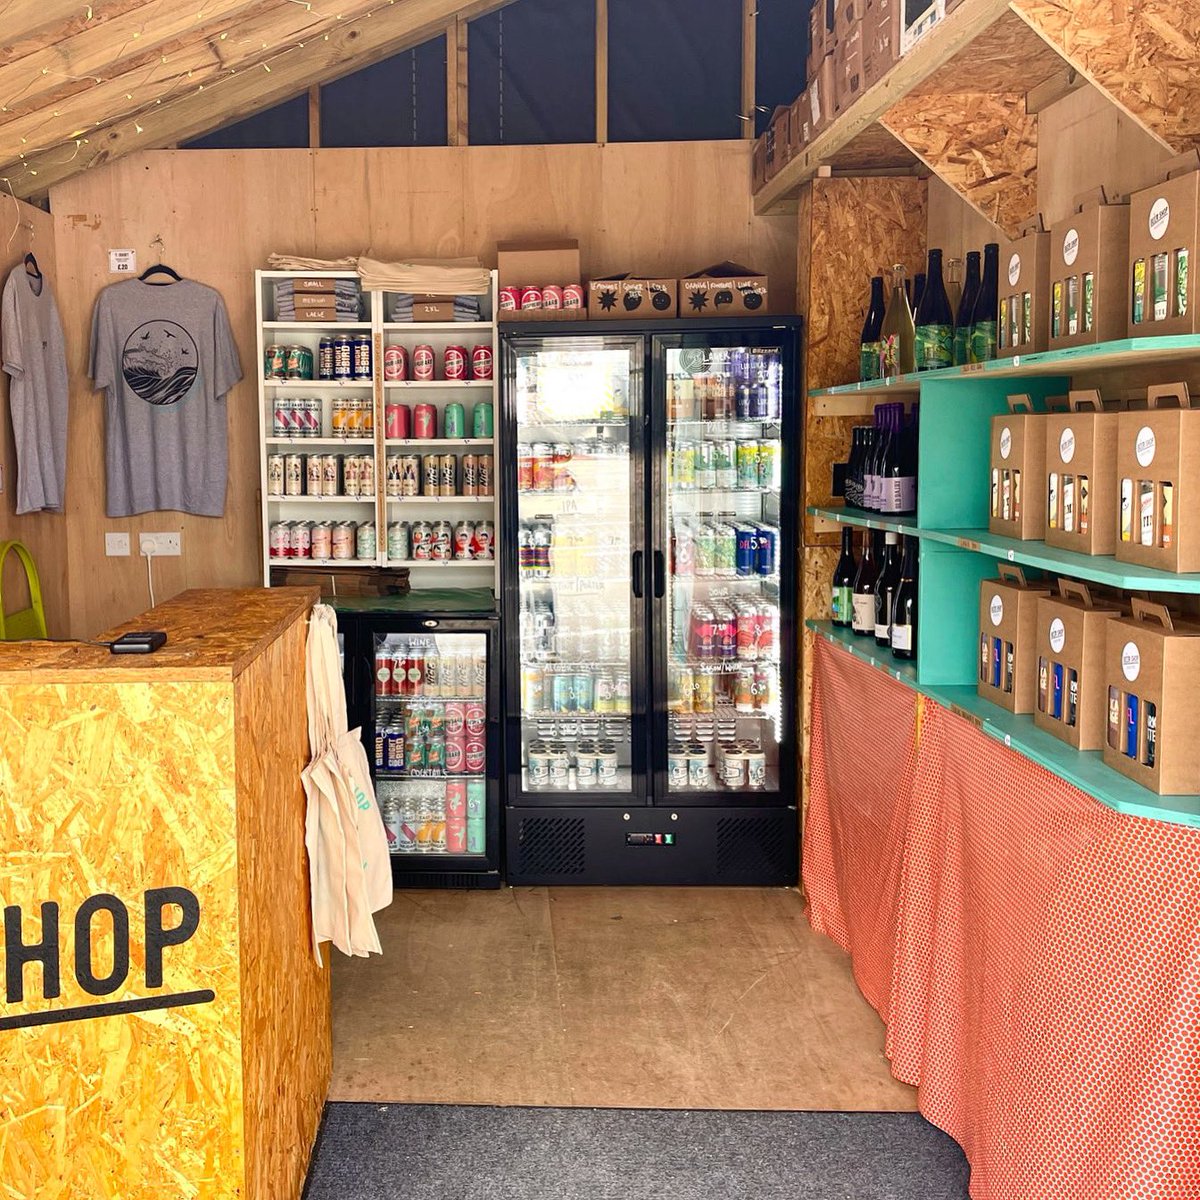 Our little hut is now full with beer & other lovely treats again! Ready for the reopening of the @FstoneHbourArm Marketplace this weekend!
Open 11-6pm every Sat, Sun & Bank Holiday until the end of September. 
#Folkestone #BeerShop #BeerShopHarbourArm #FolkestoneHarbourArm #Kent